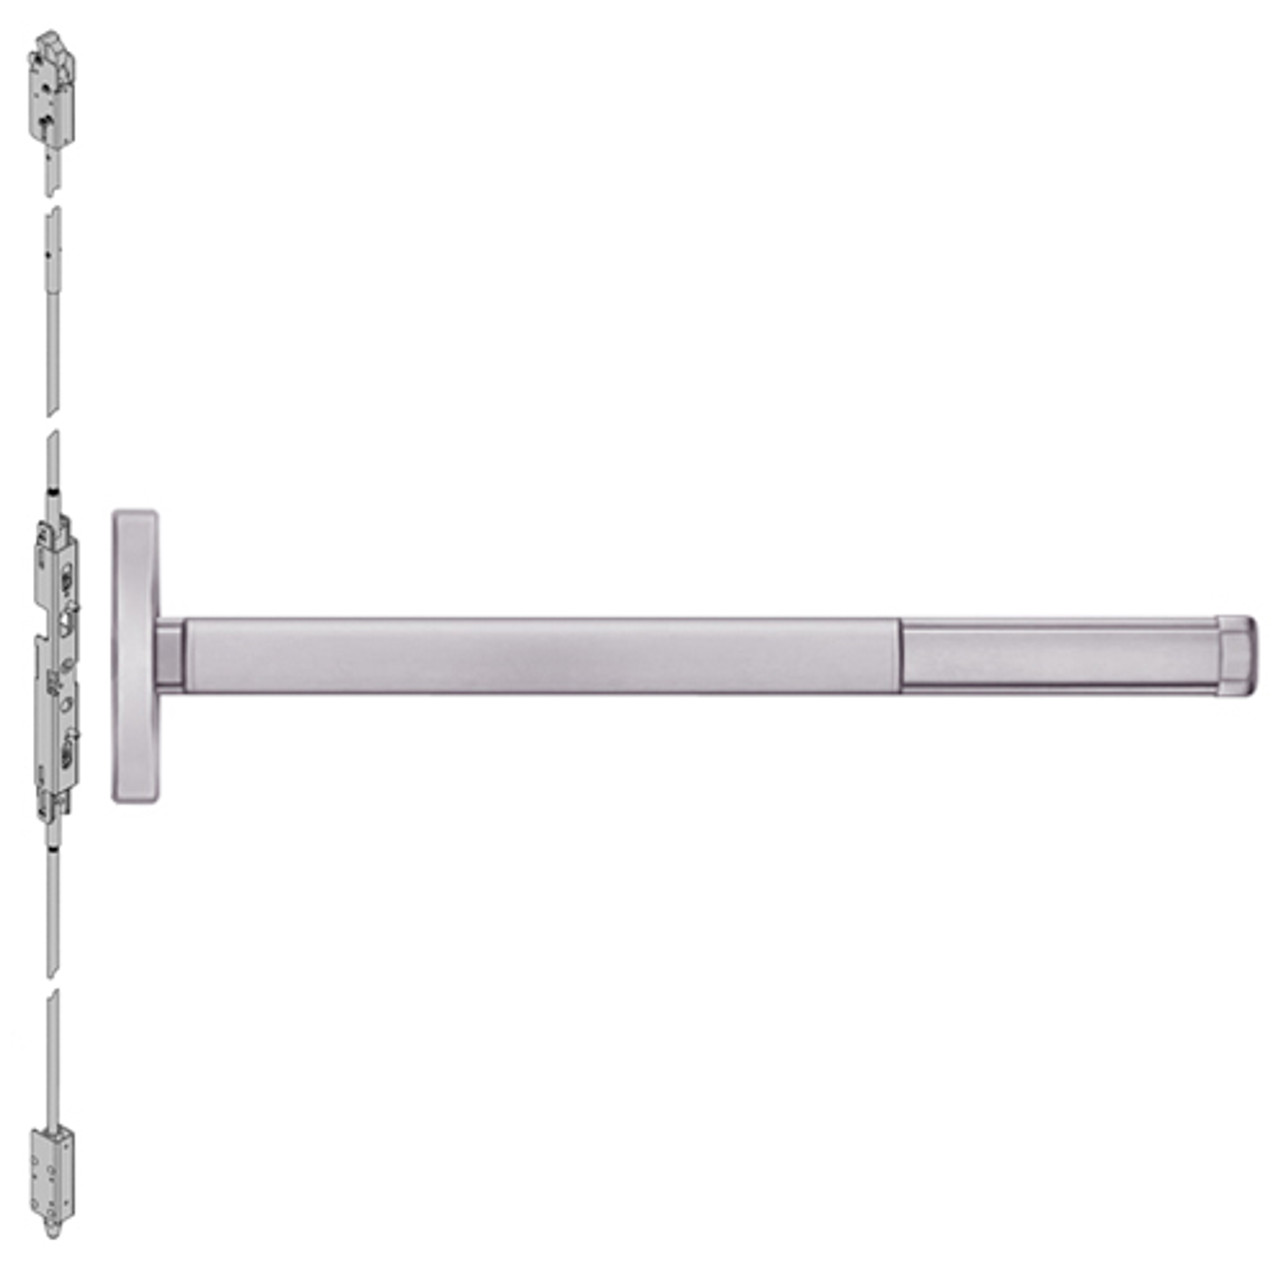 ELRFL2608-630-48 PHI 2600 Series Fire Rated Concealed Vertical Rod Exit Device with Electric Latch Retraction Prepped for Key Controls Lever in Satin Stainless Steel Finish